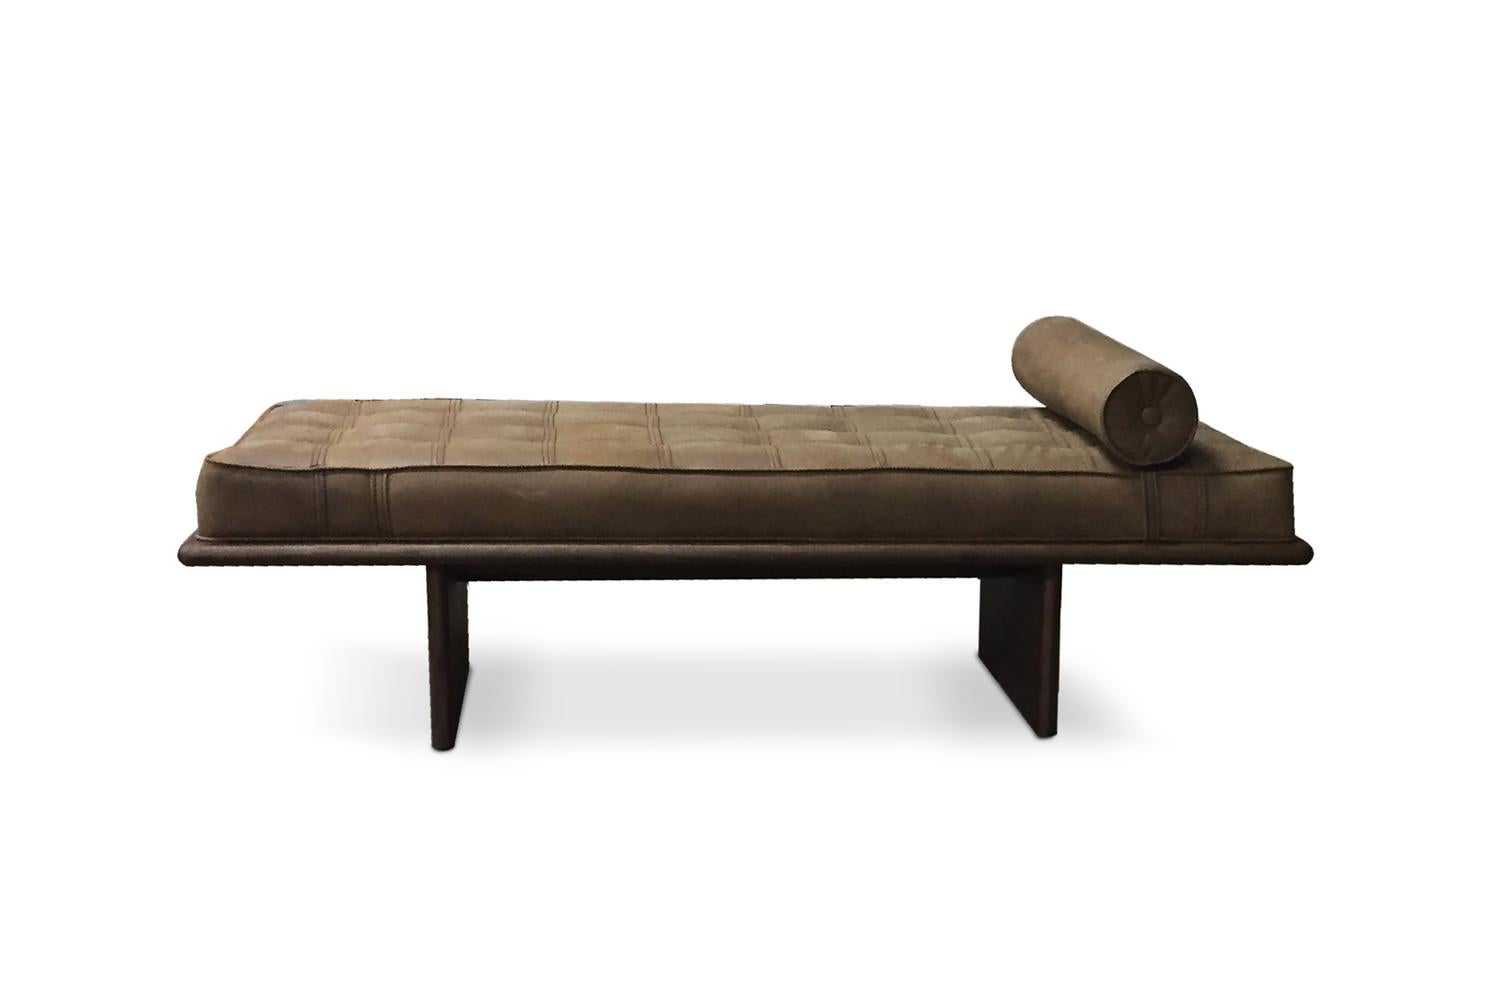 Frederic daybed by Collector
Materials: Structure in solid oak wood. Upholstered in genuine Sequoia 4003 leather.
Dimensions: W 190 x D 90 x H 50 cm 
Depending on the material the price may vary.

Frederic daybed it’s inspired by Japanese